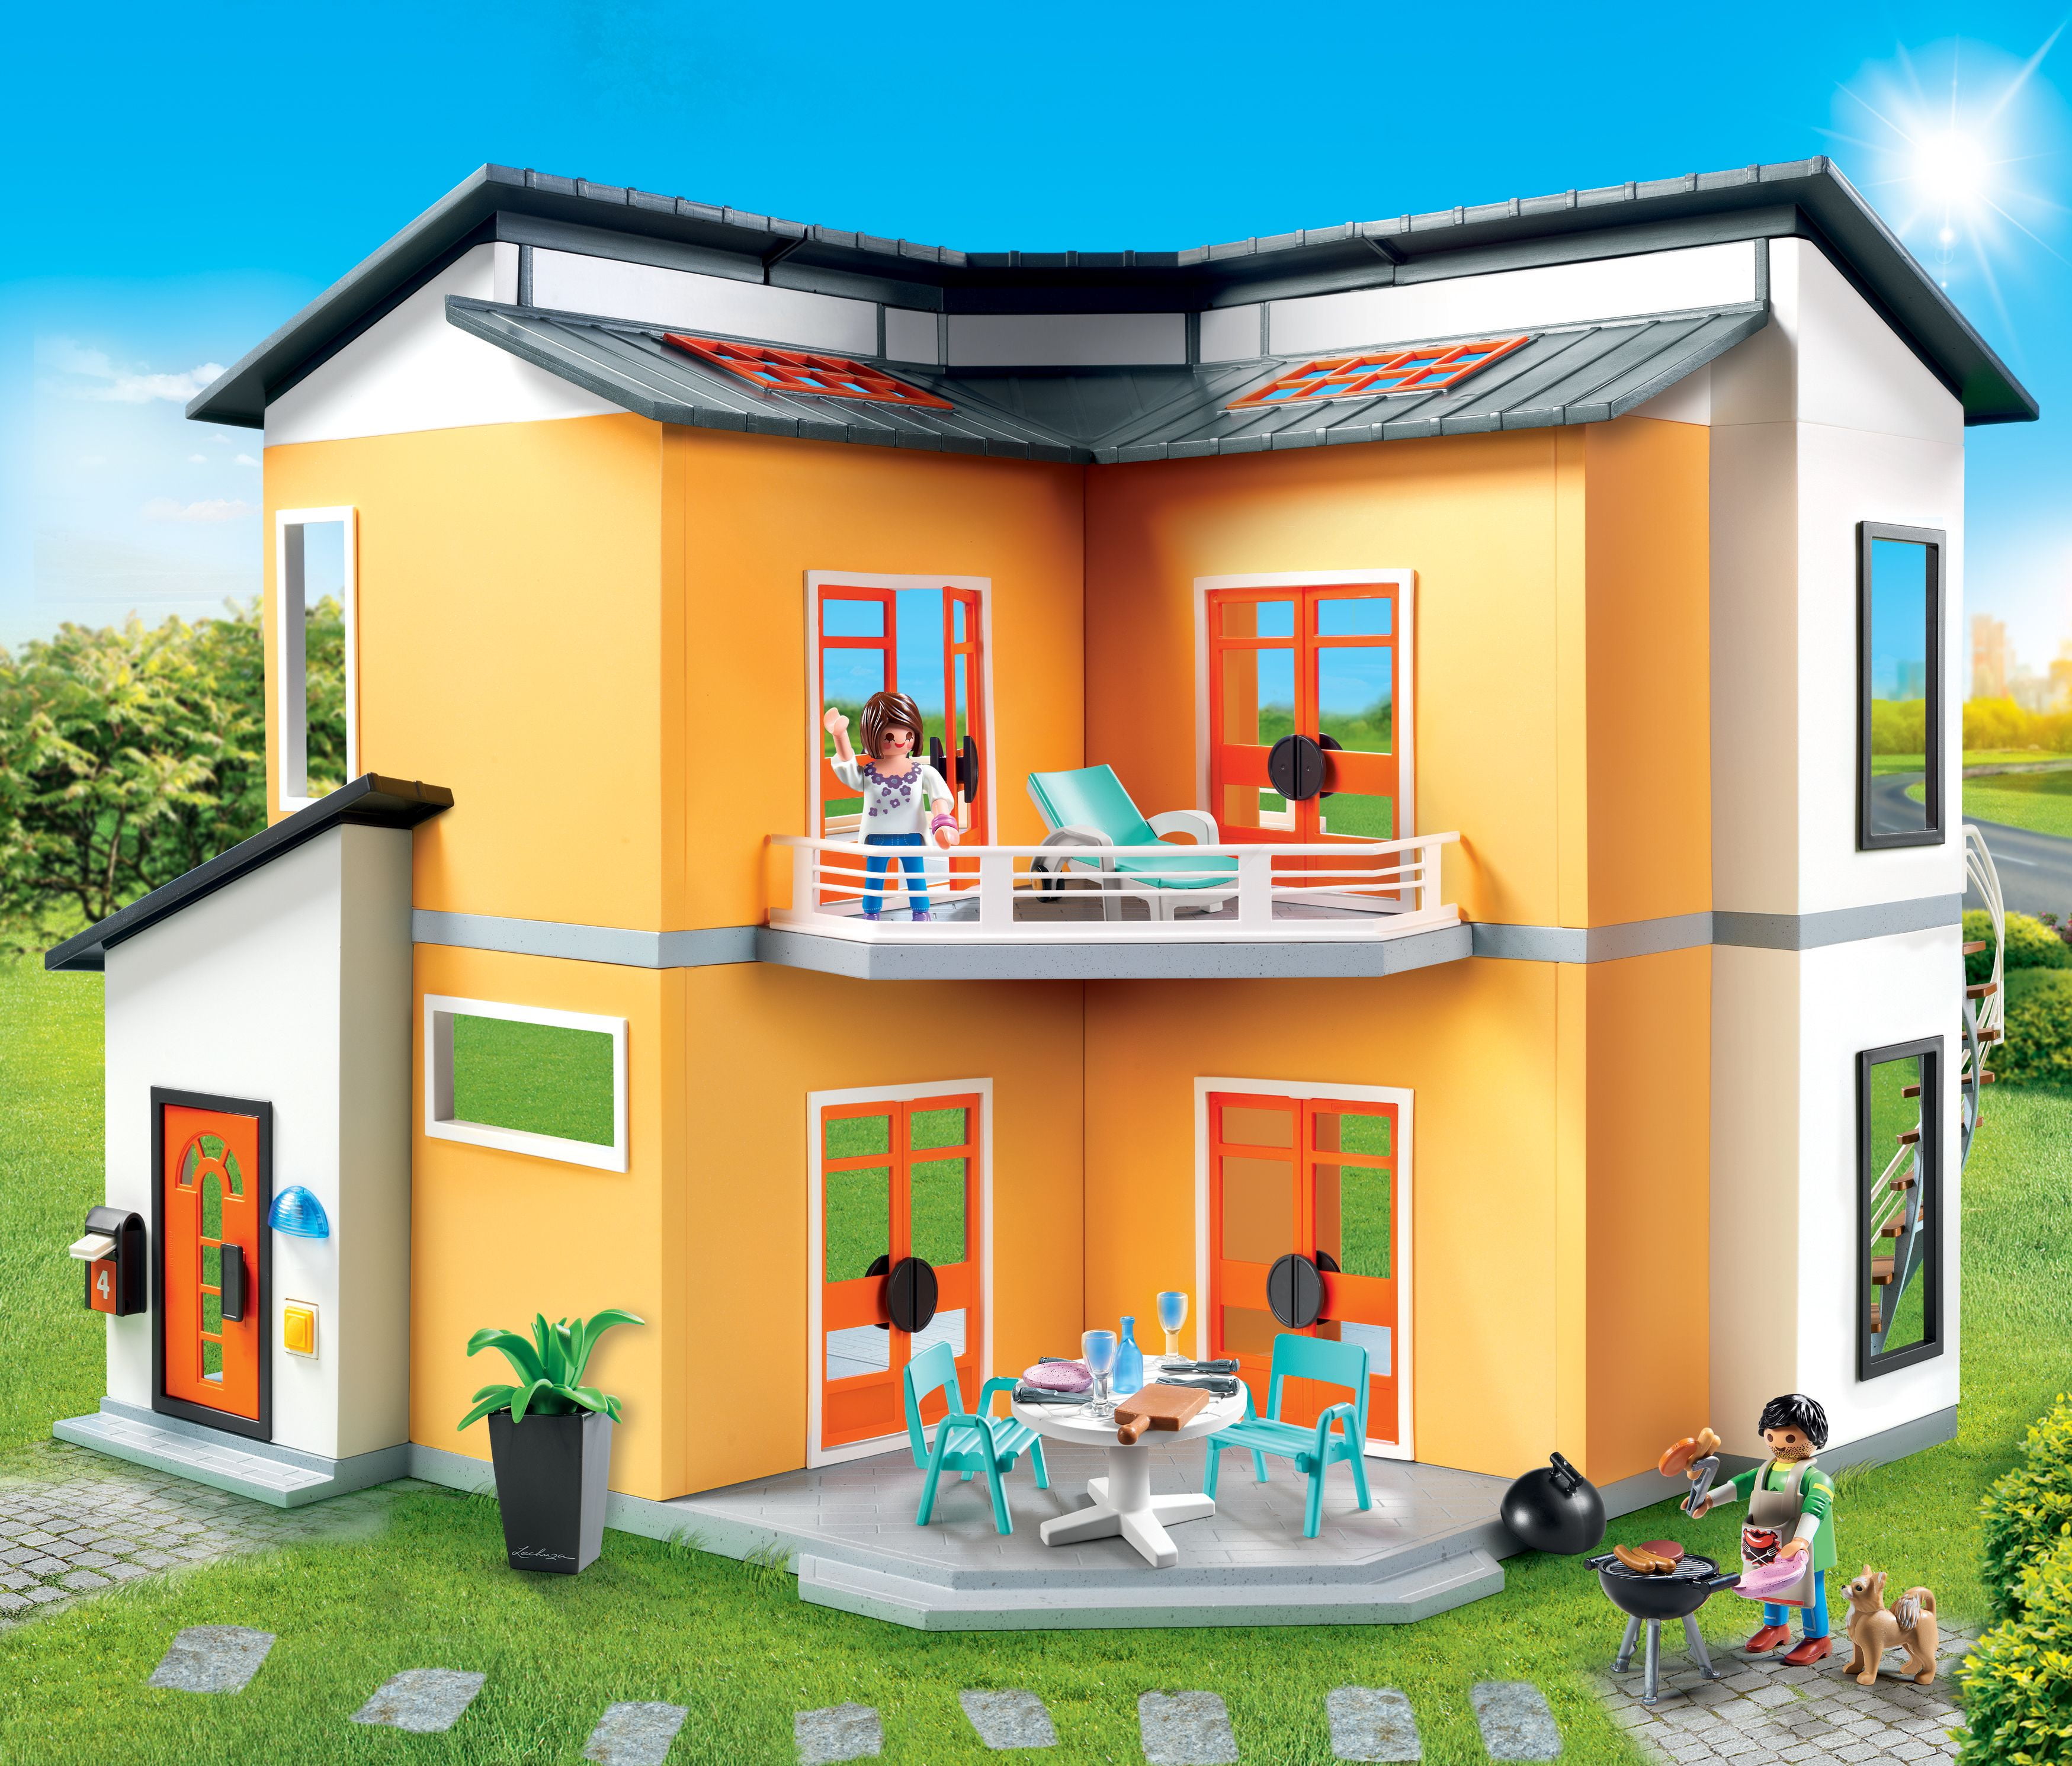  Playmobil® Furniture set for 70205 dollhouse or 9266 modern  home: 70206 kitchen + 70210 baby room : Toys & Games